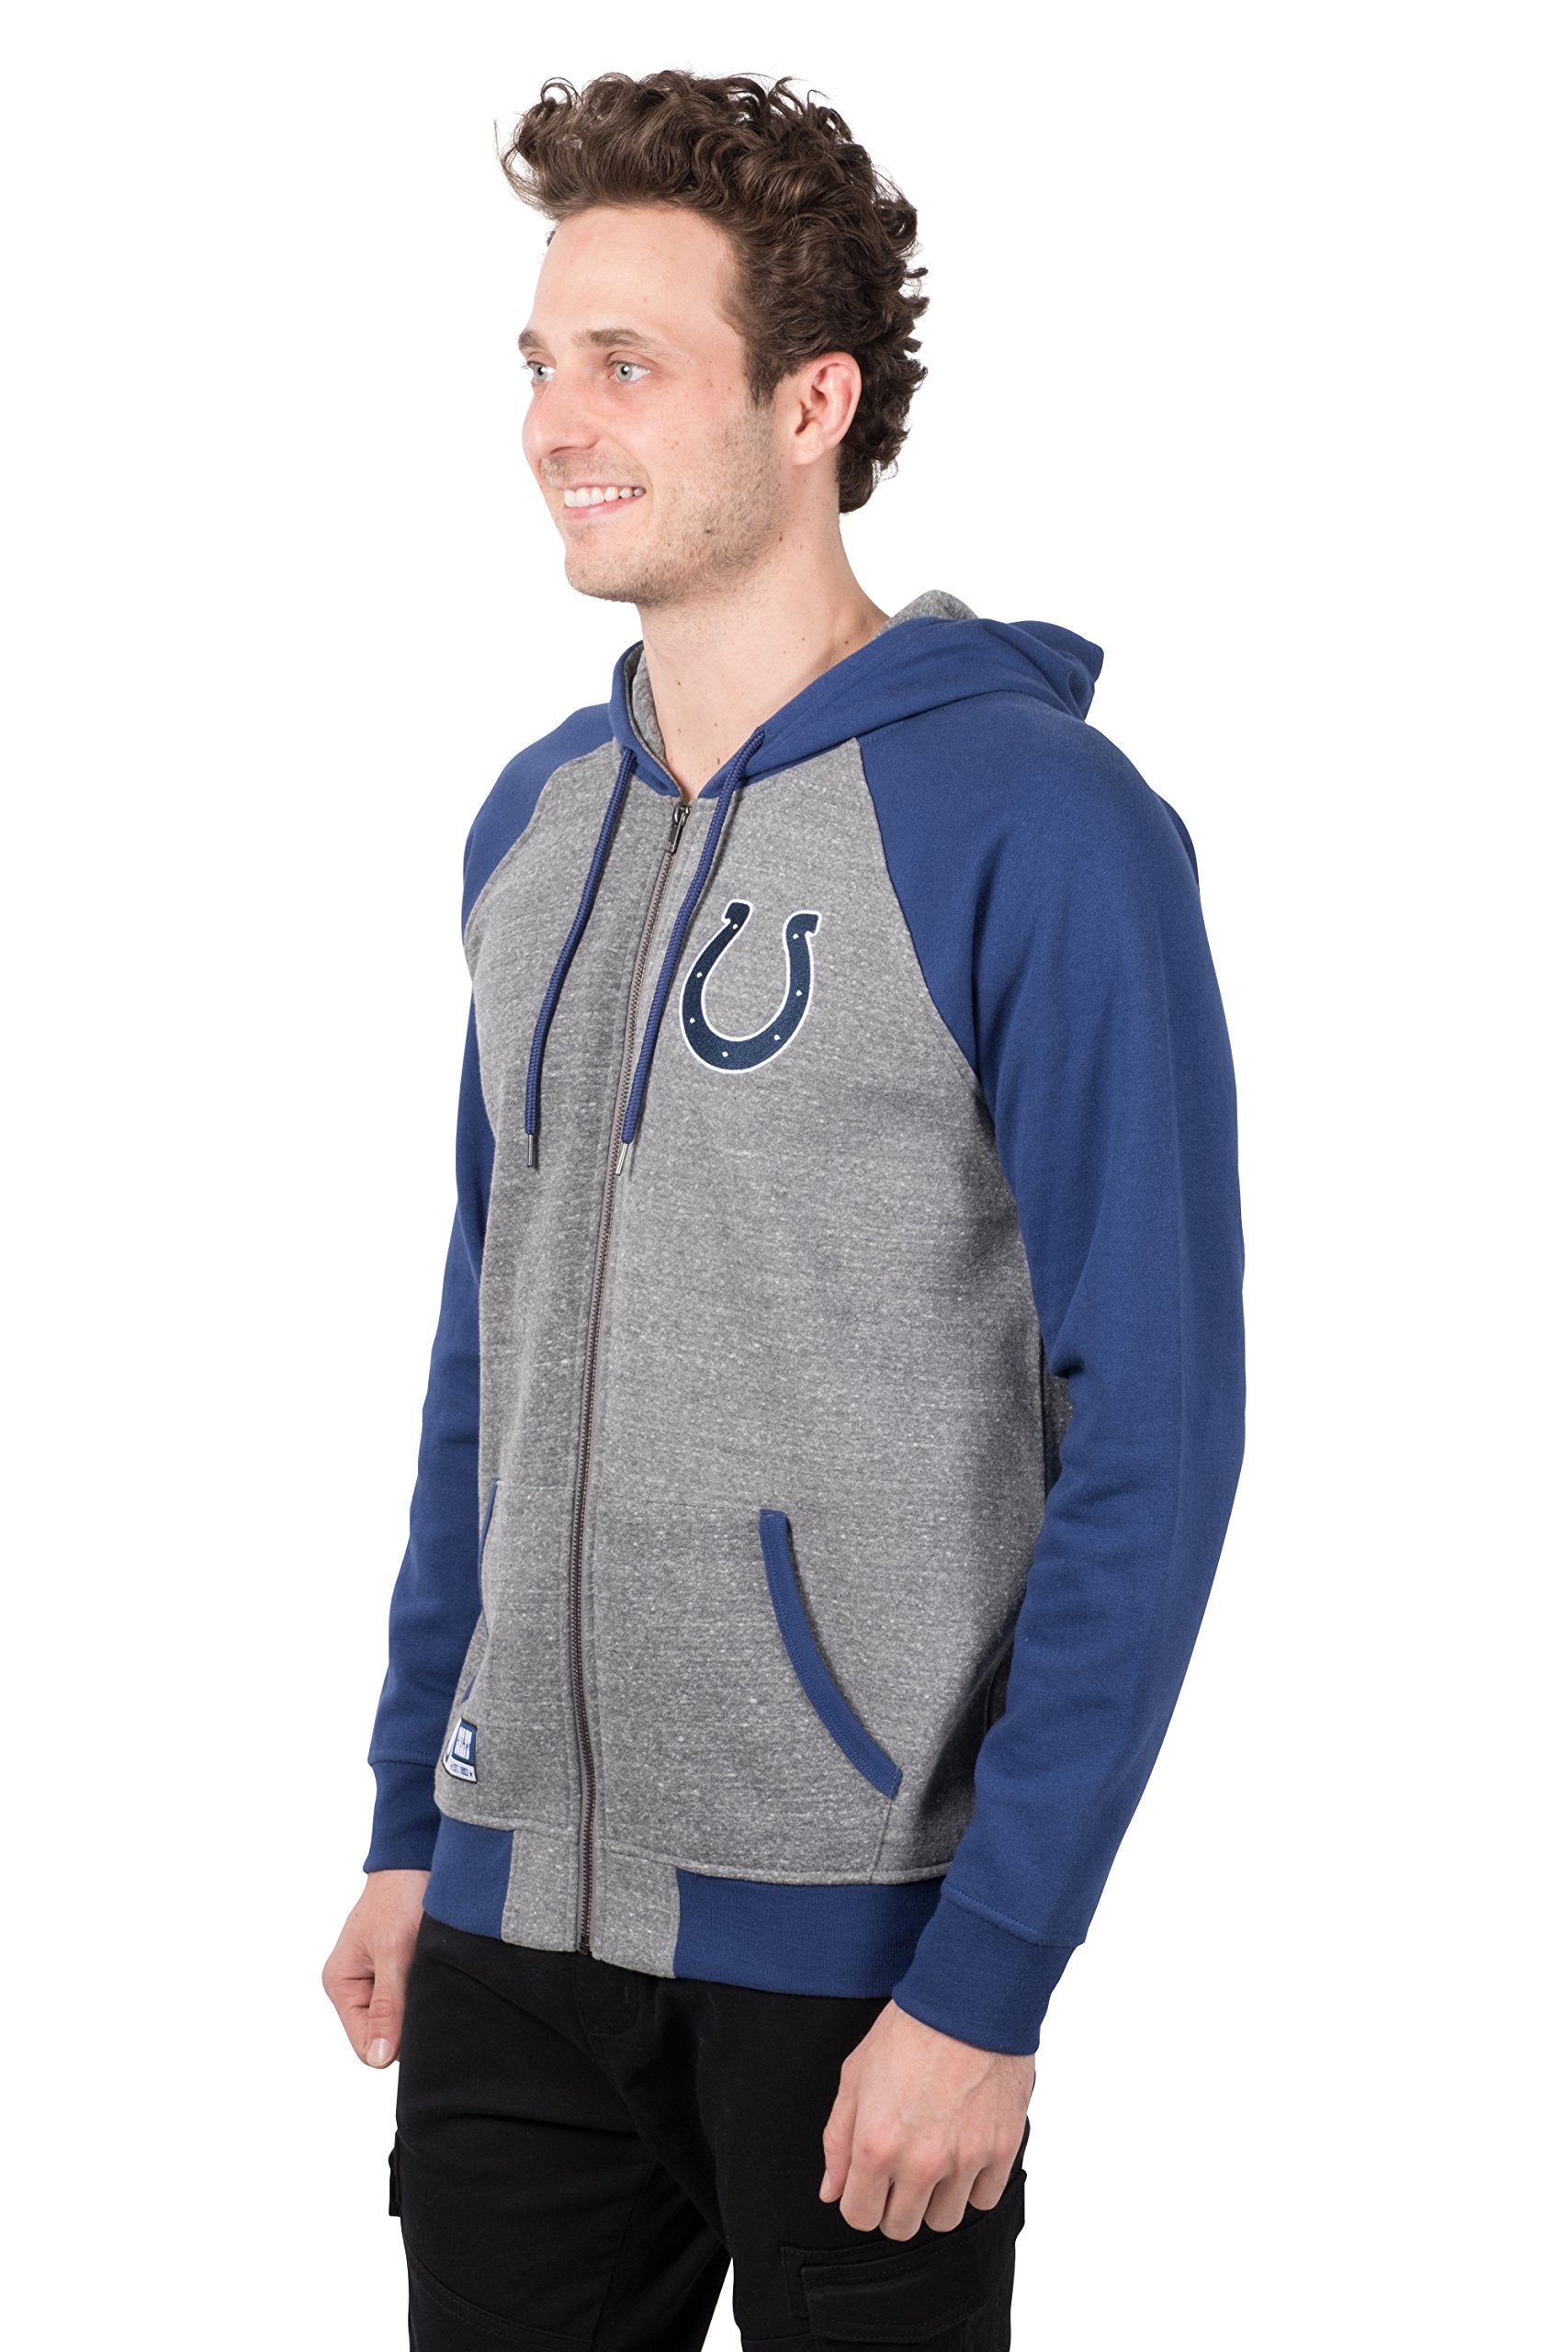 Ultra Game NFL Indianapolis Colts Mens Full Zip Soft Fleece Raglan Hoodie|Indianapolis Colts